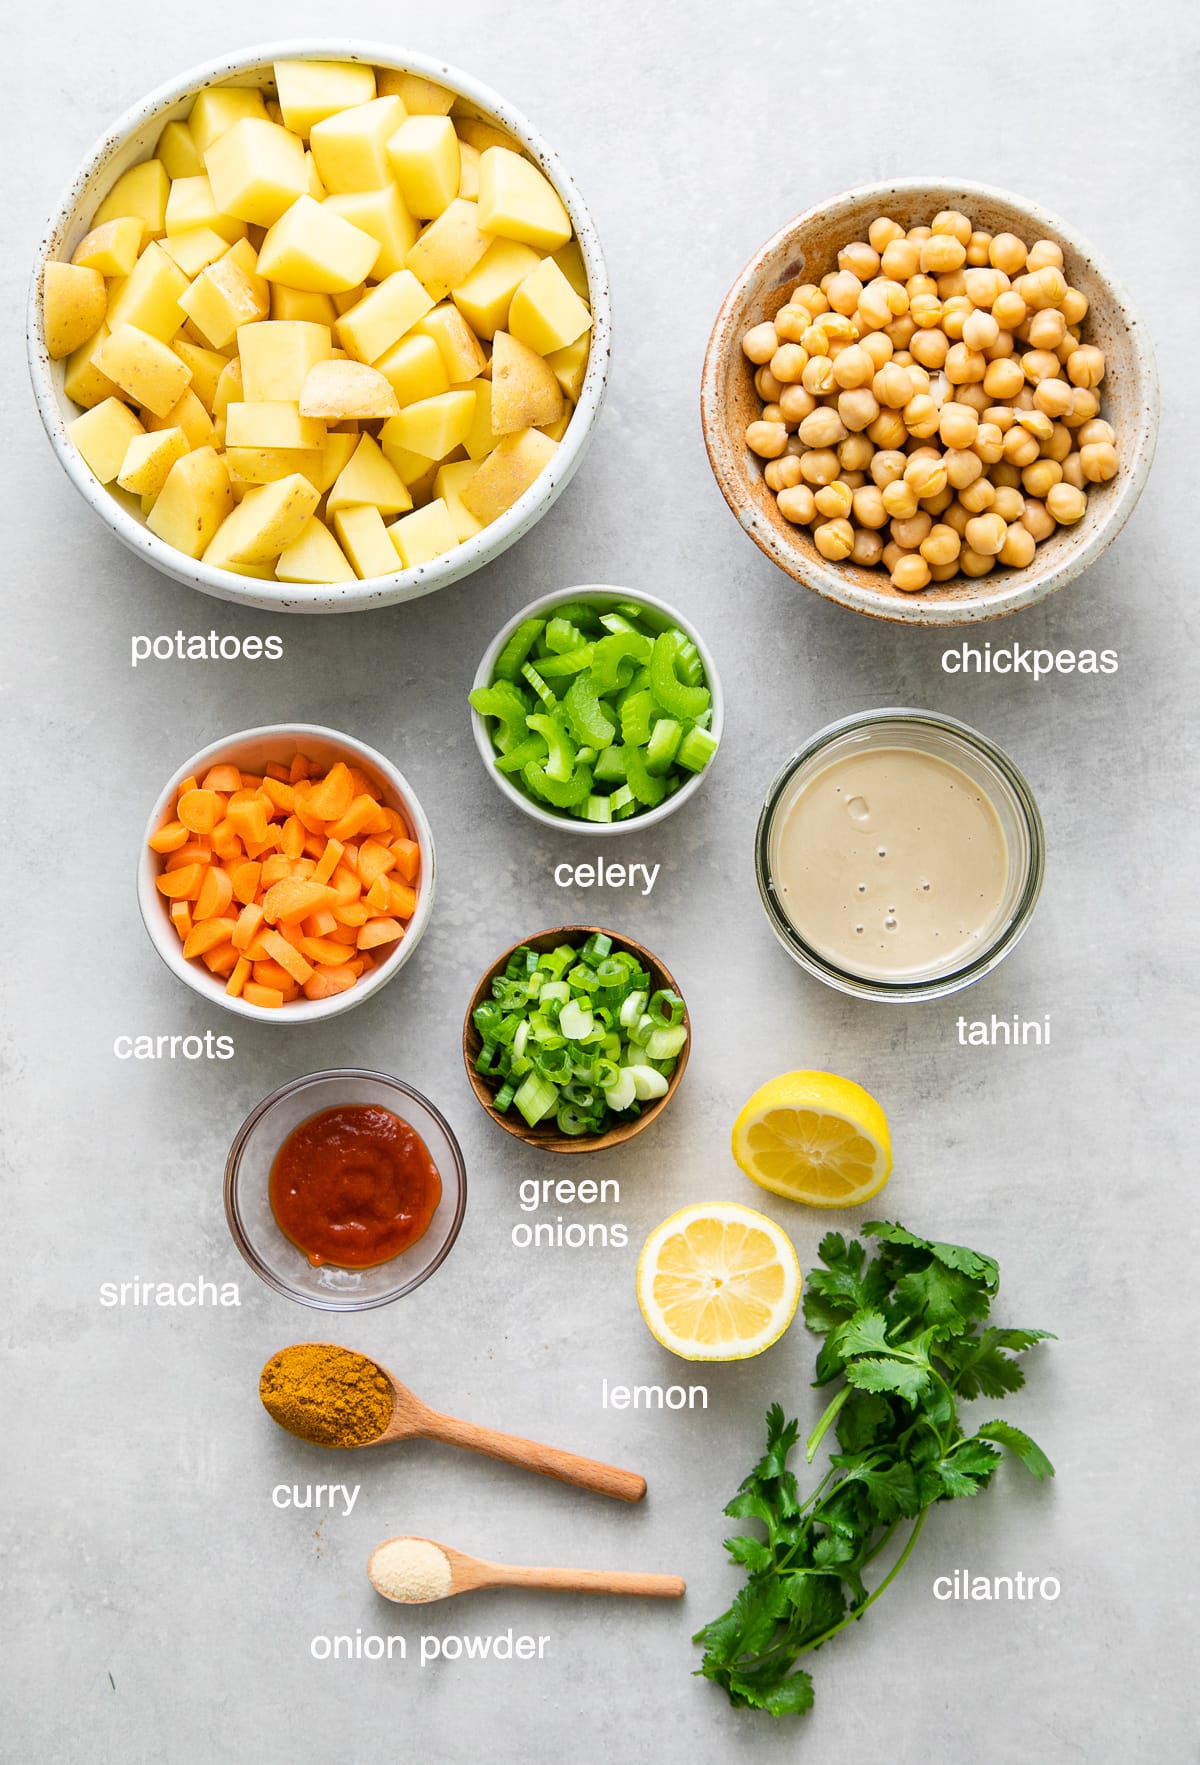 top down view of ingredients used to make curried potato salad recipe.